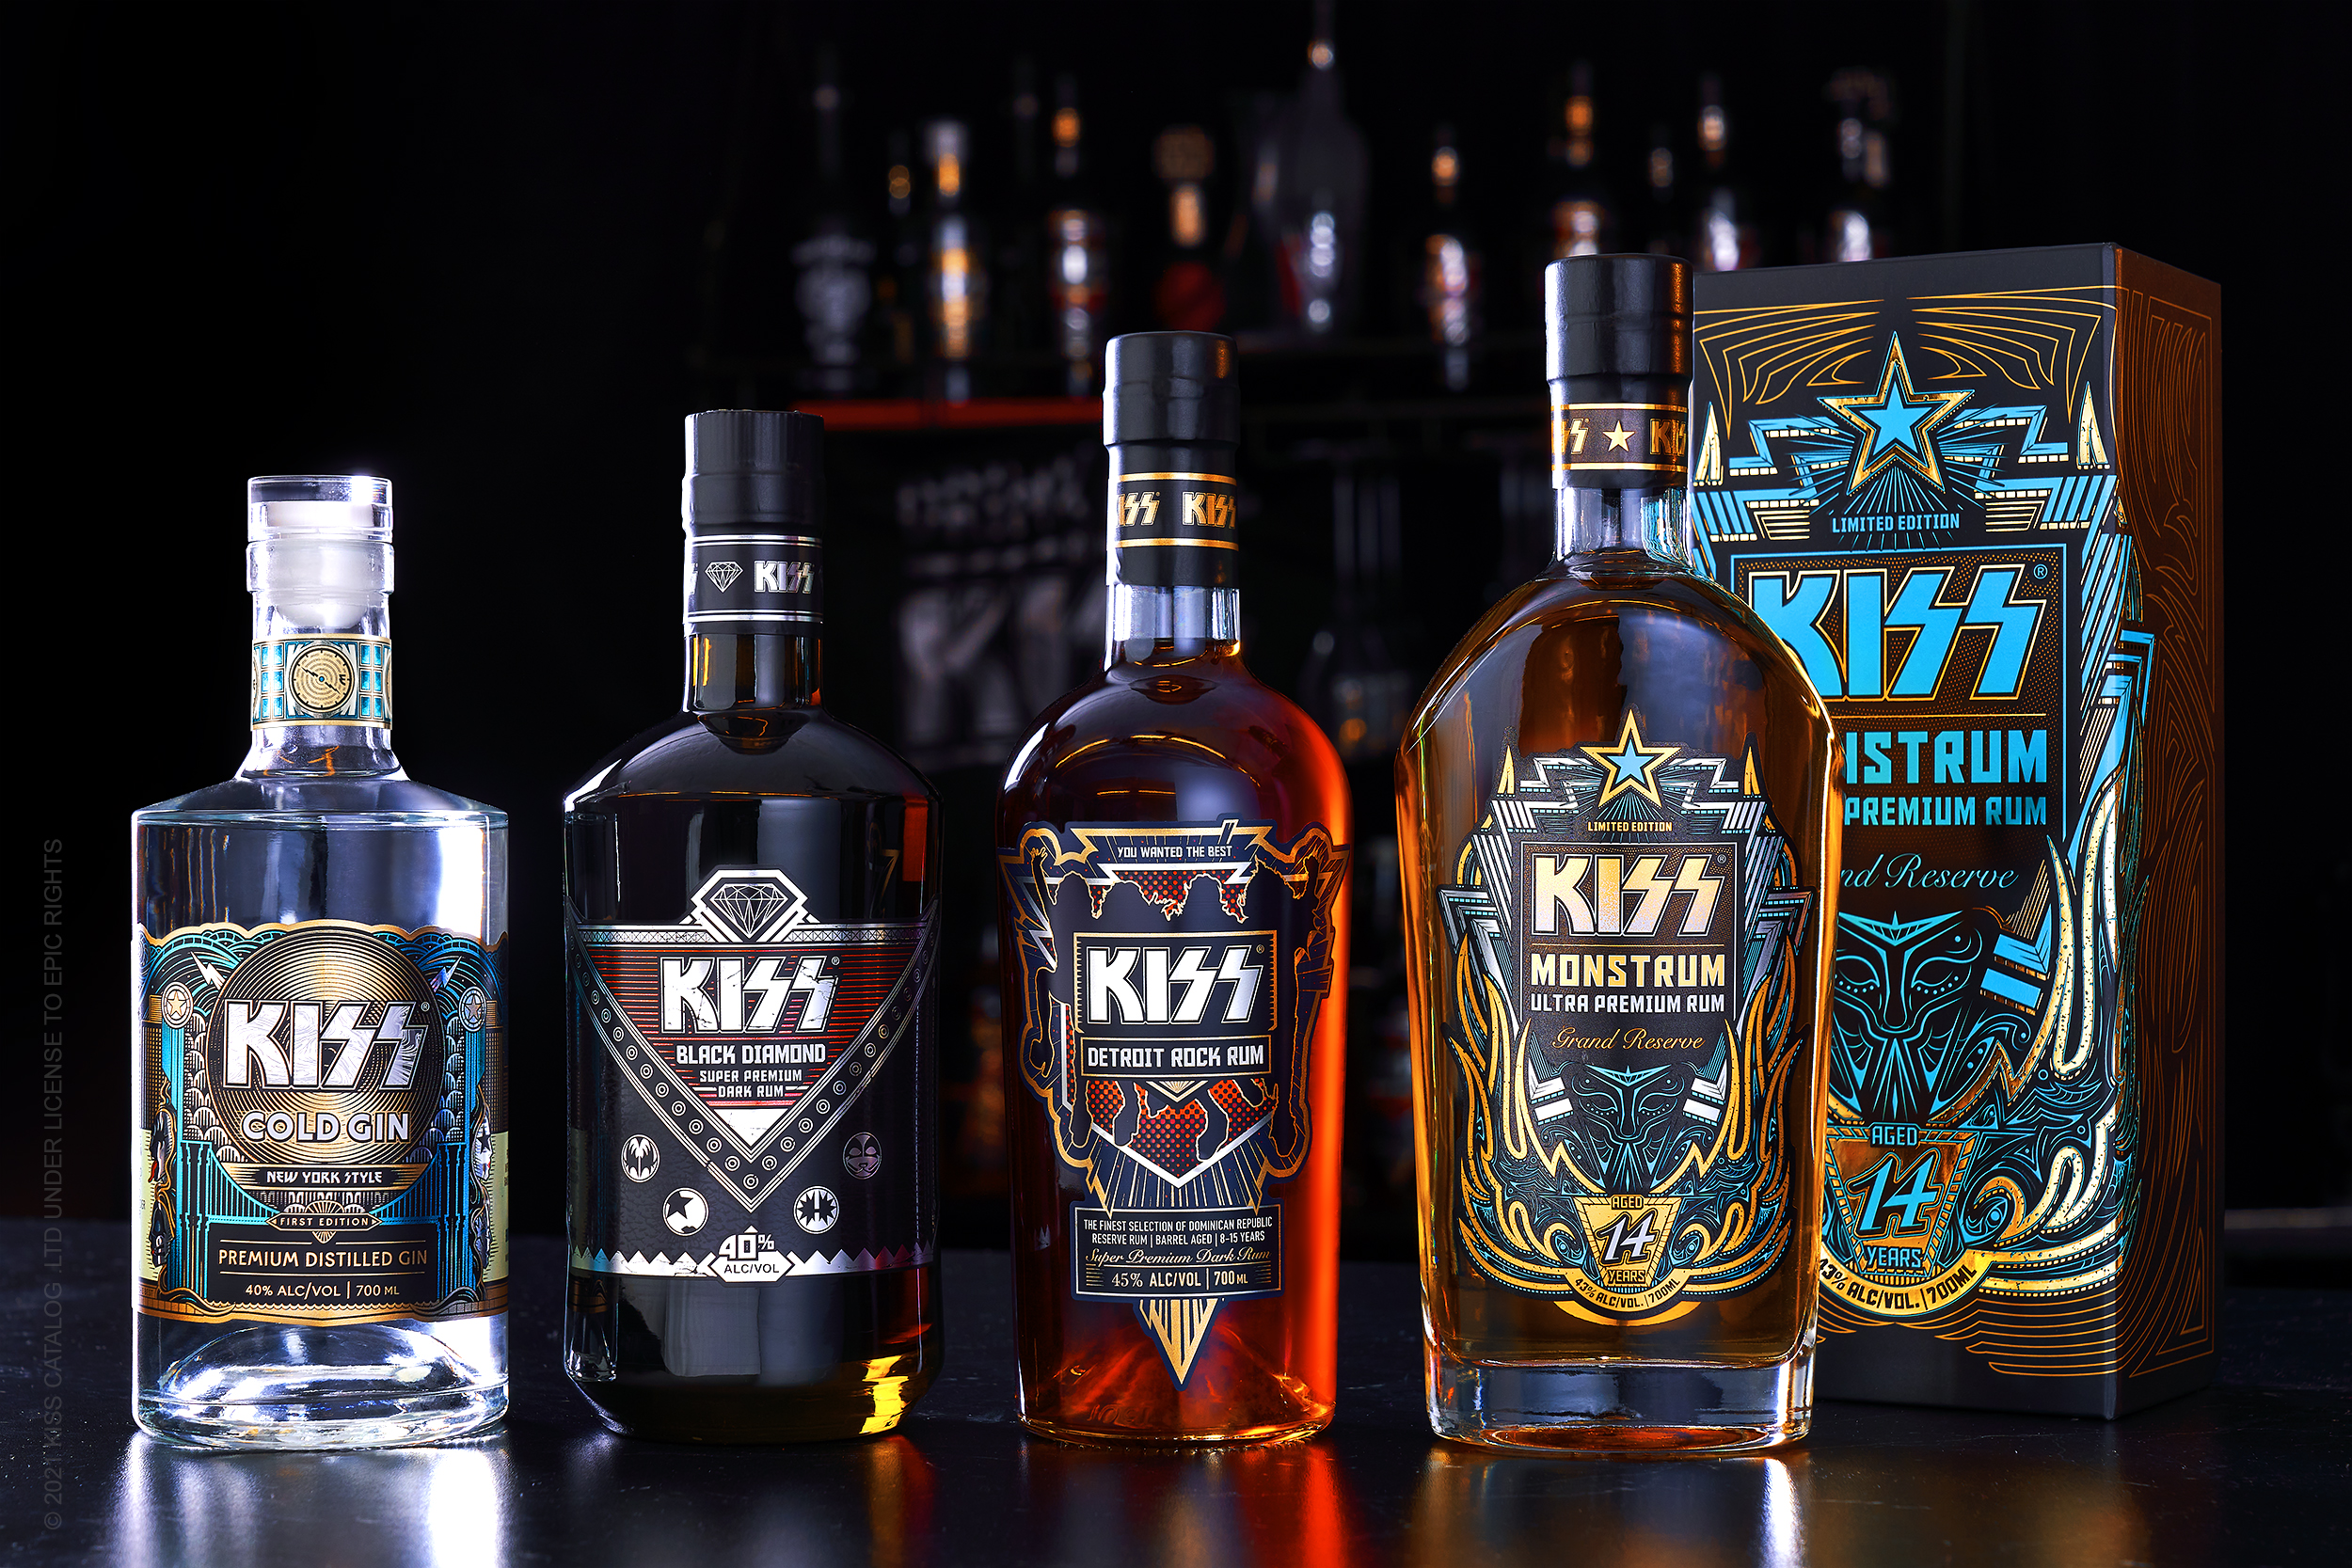 Bottle shots of the range: Rock and roll band Kiss launches spirits brand in US